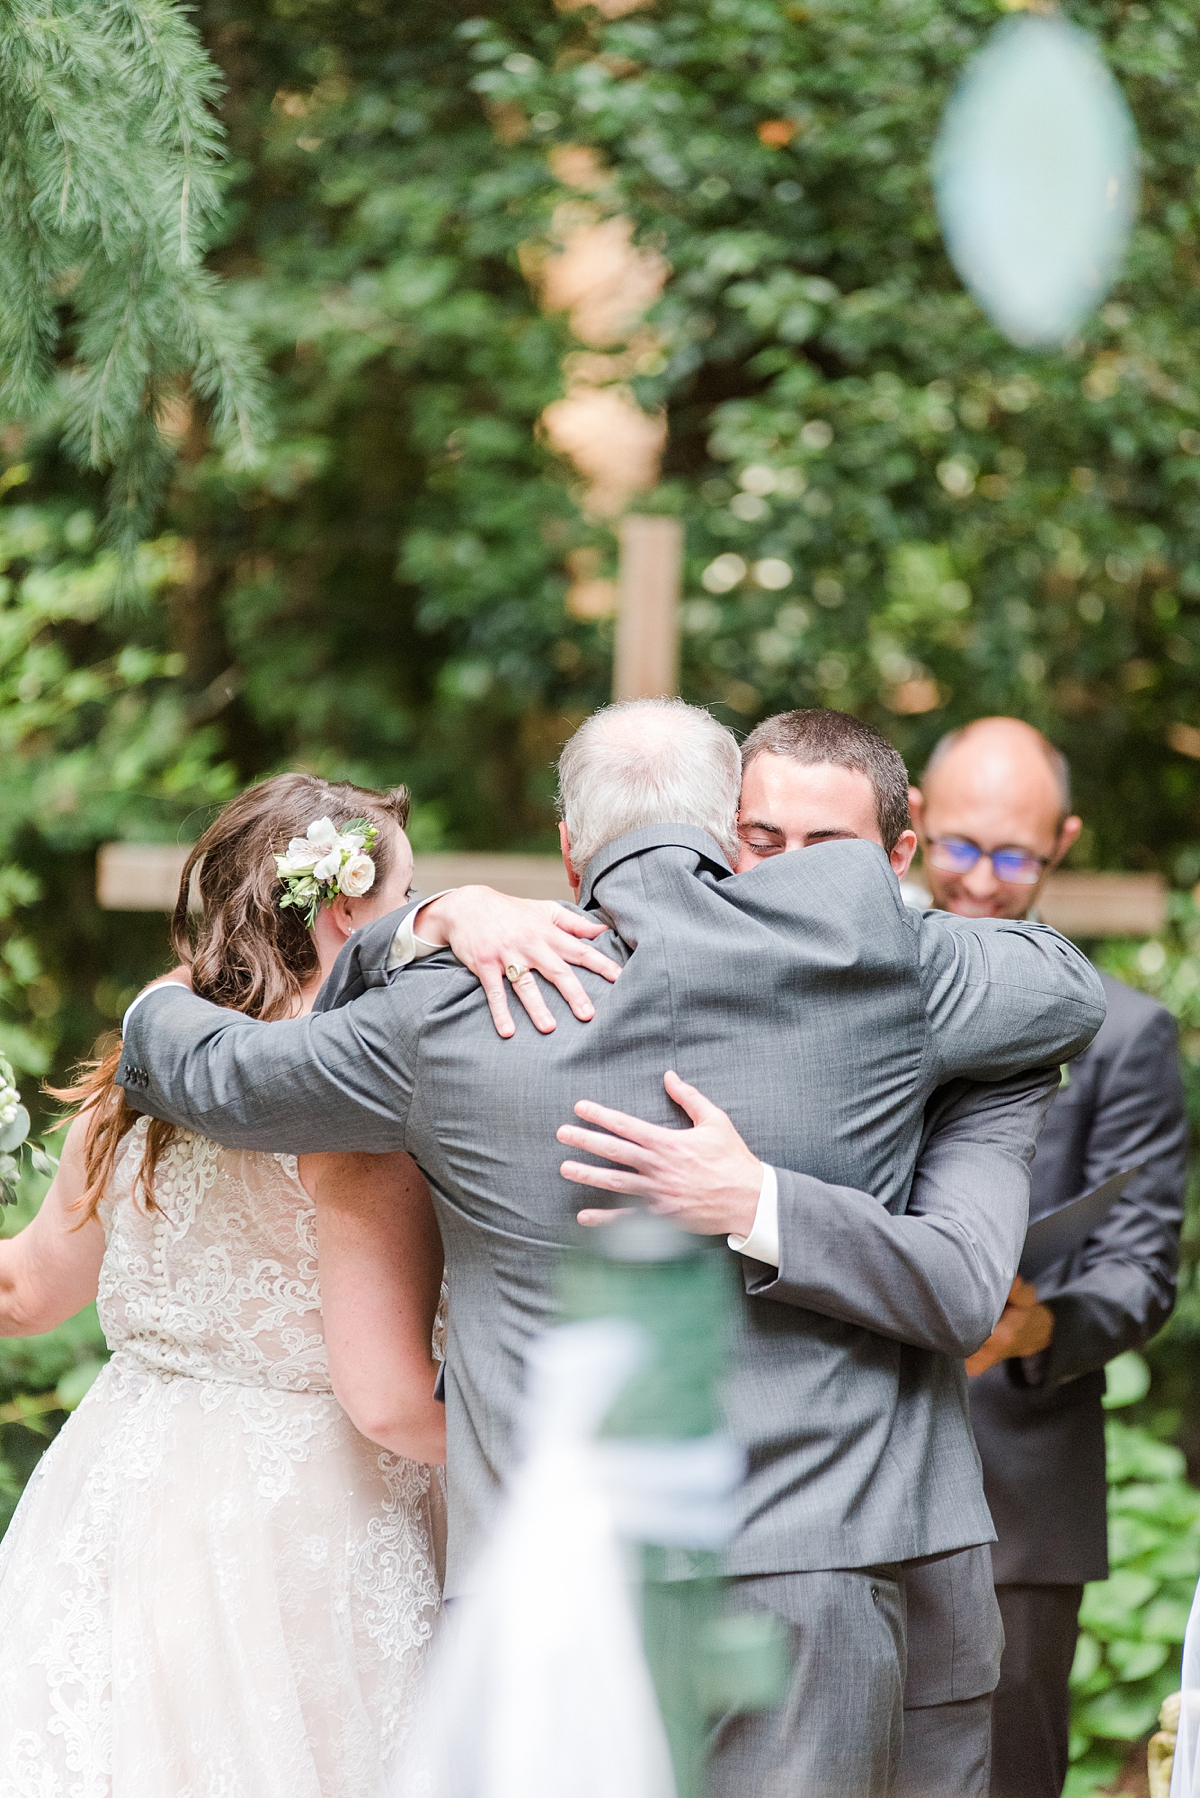 Groom's Reaction to the Bride at Yorktown Backyard Intimate Wedding Ceremony. Wedding Photography by Yorktown Wedding Photographer Kailey Brianne Photography. 